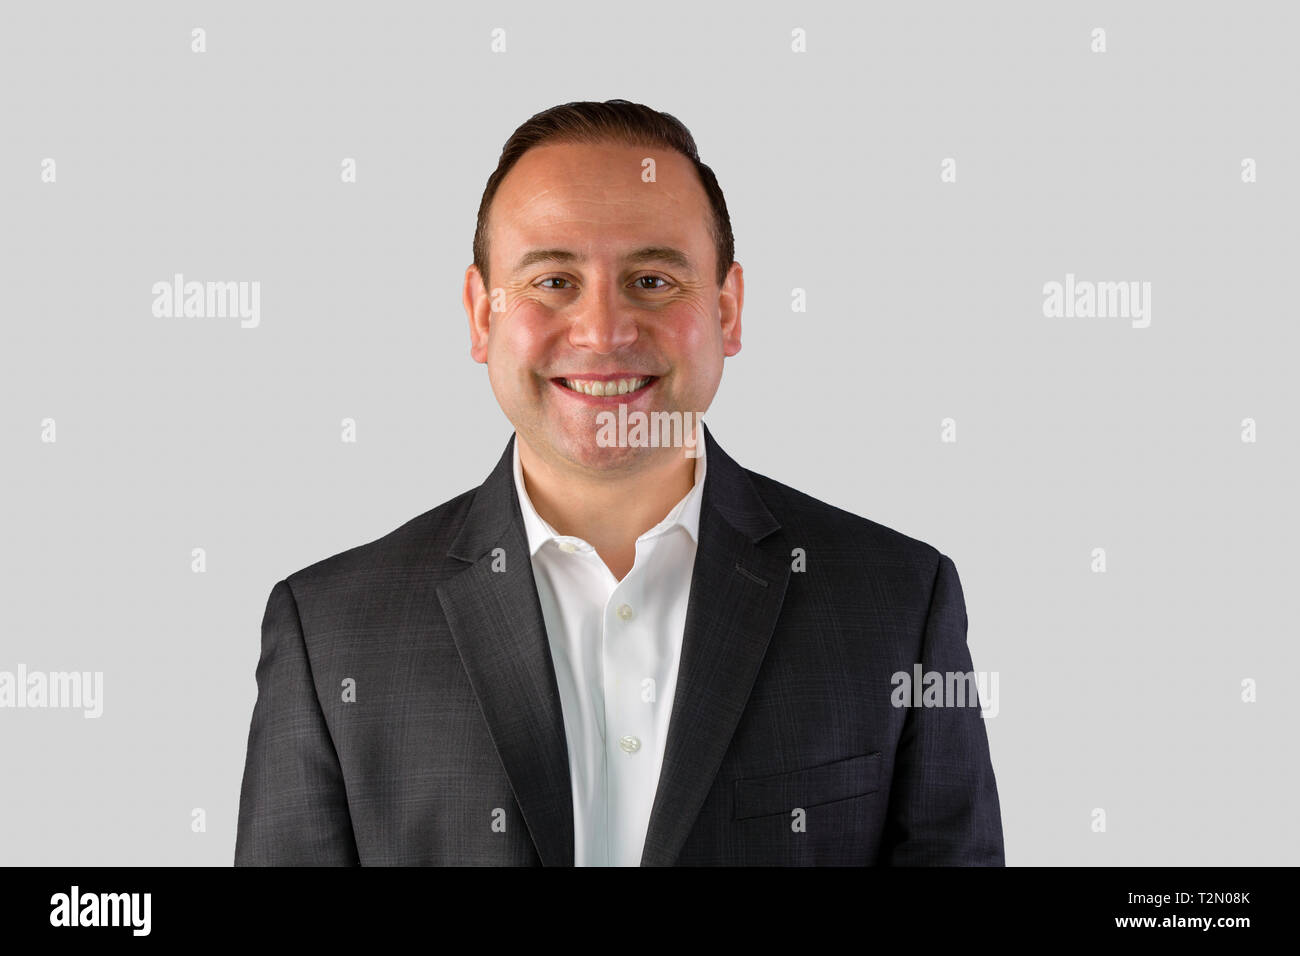 A portrait of a happy, smiling businessman in a black suit with a white background and copy space. Stock Photo